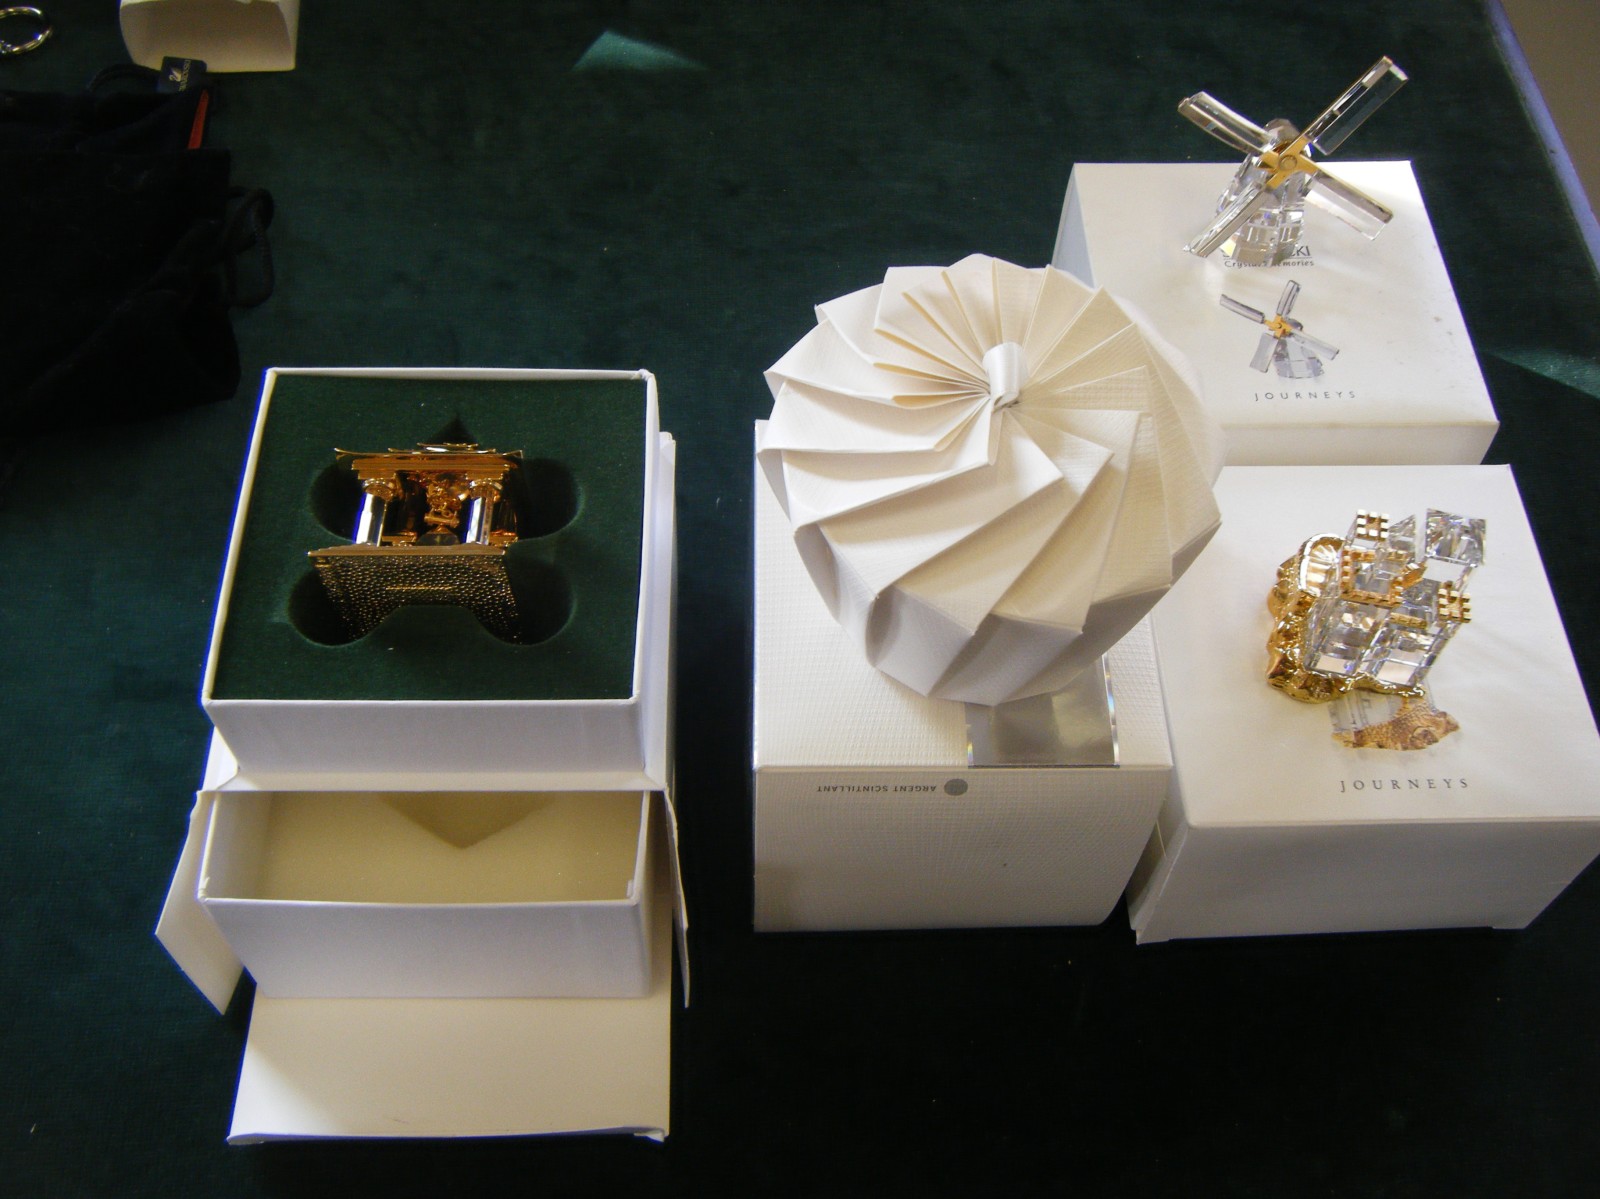 Swarovski crystals, Memories, 4 x boxed items, each with certificate of authenticity, Windmill,